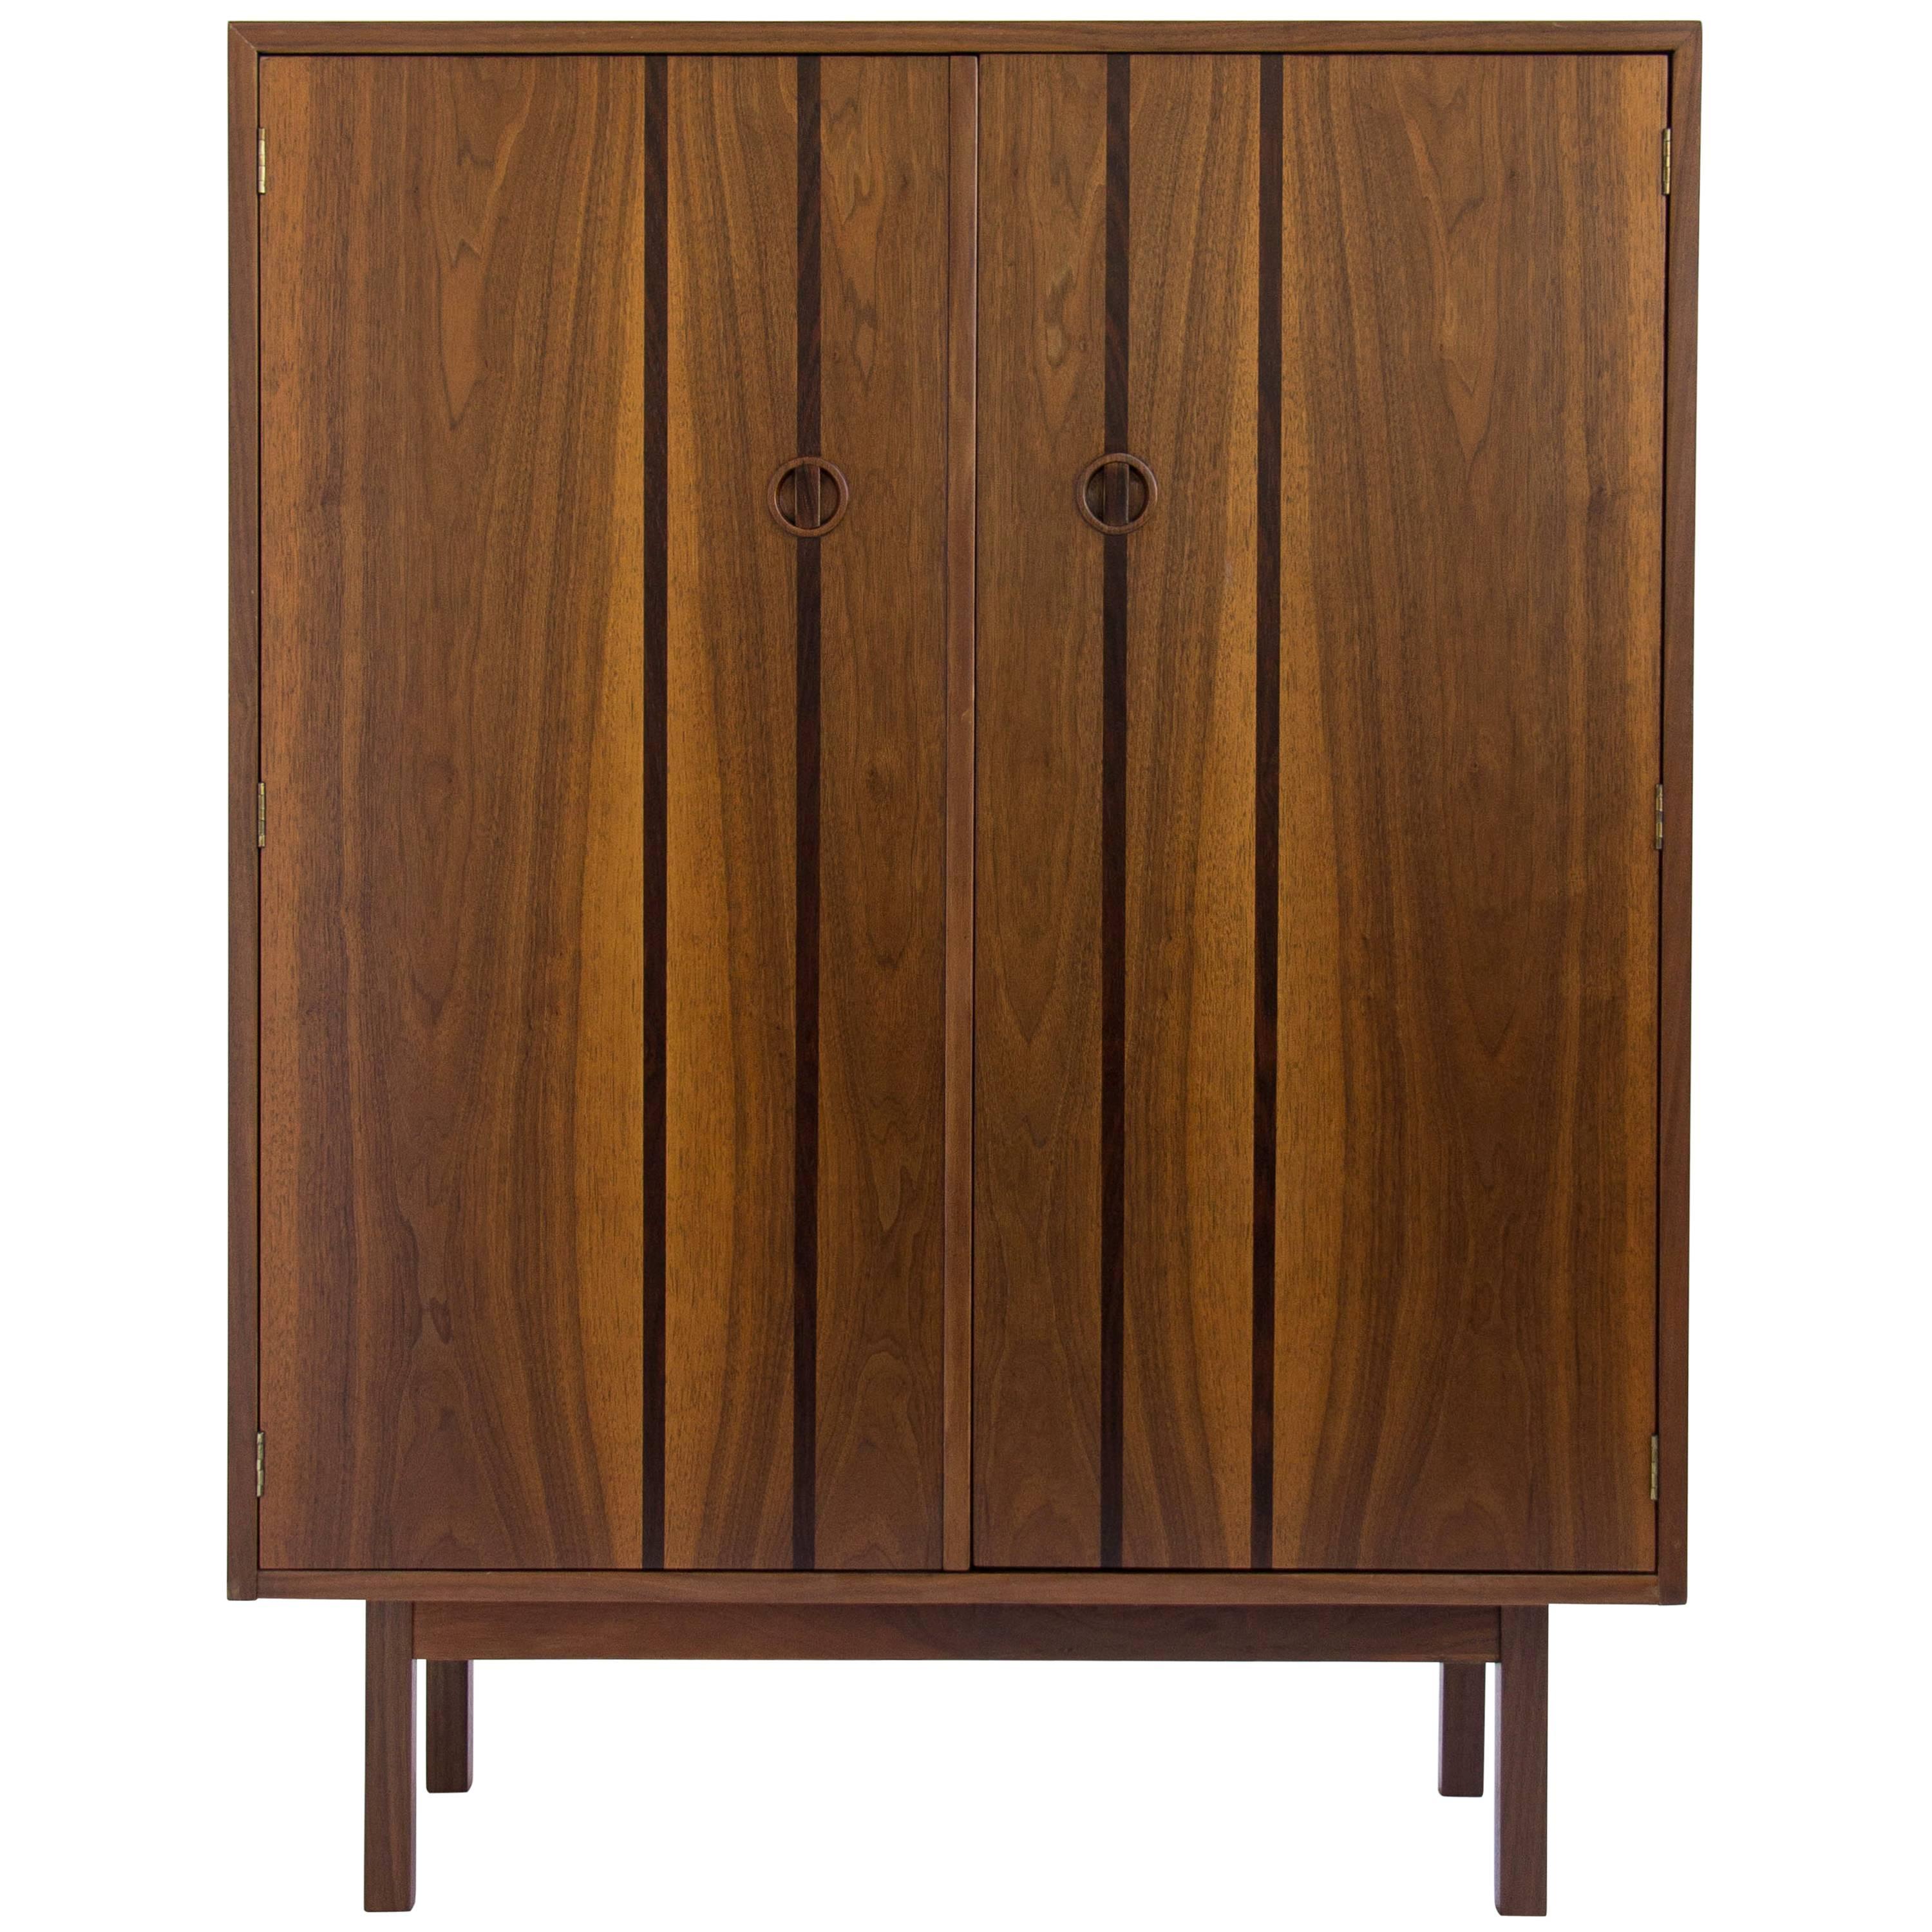 H. Paul Browning for Stanley Furniture Co. Walnut and Rosewood Highboy